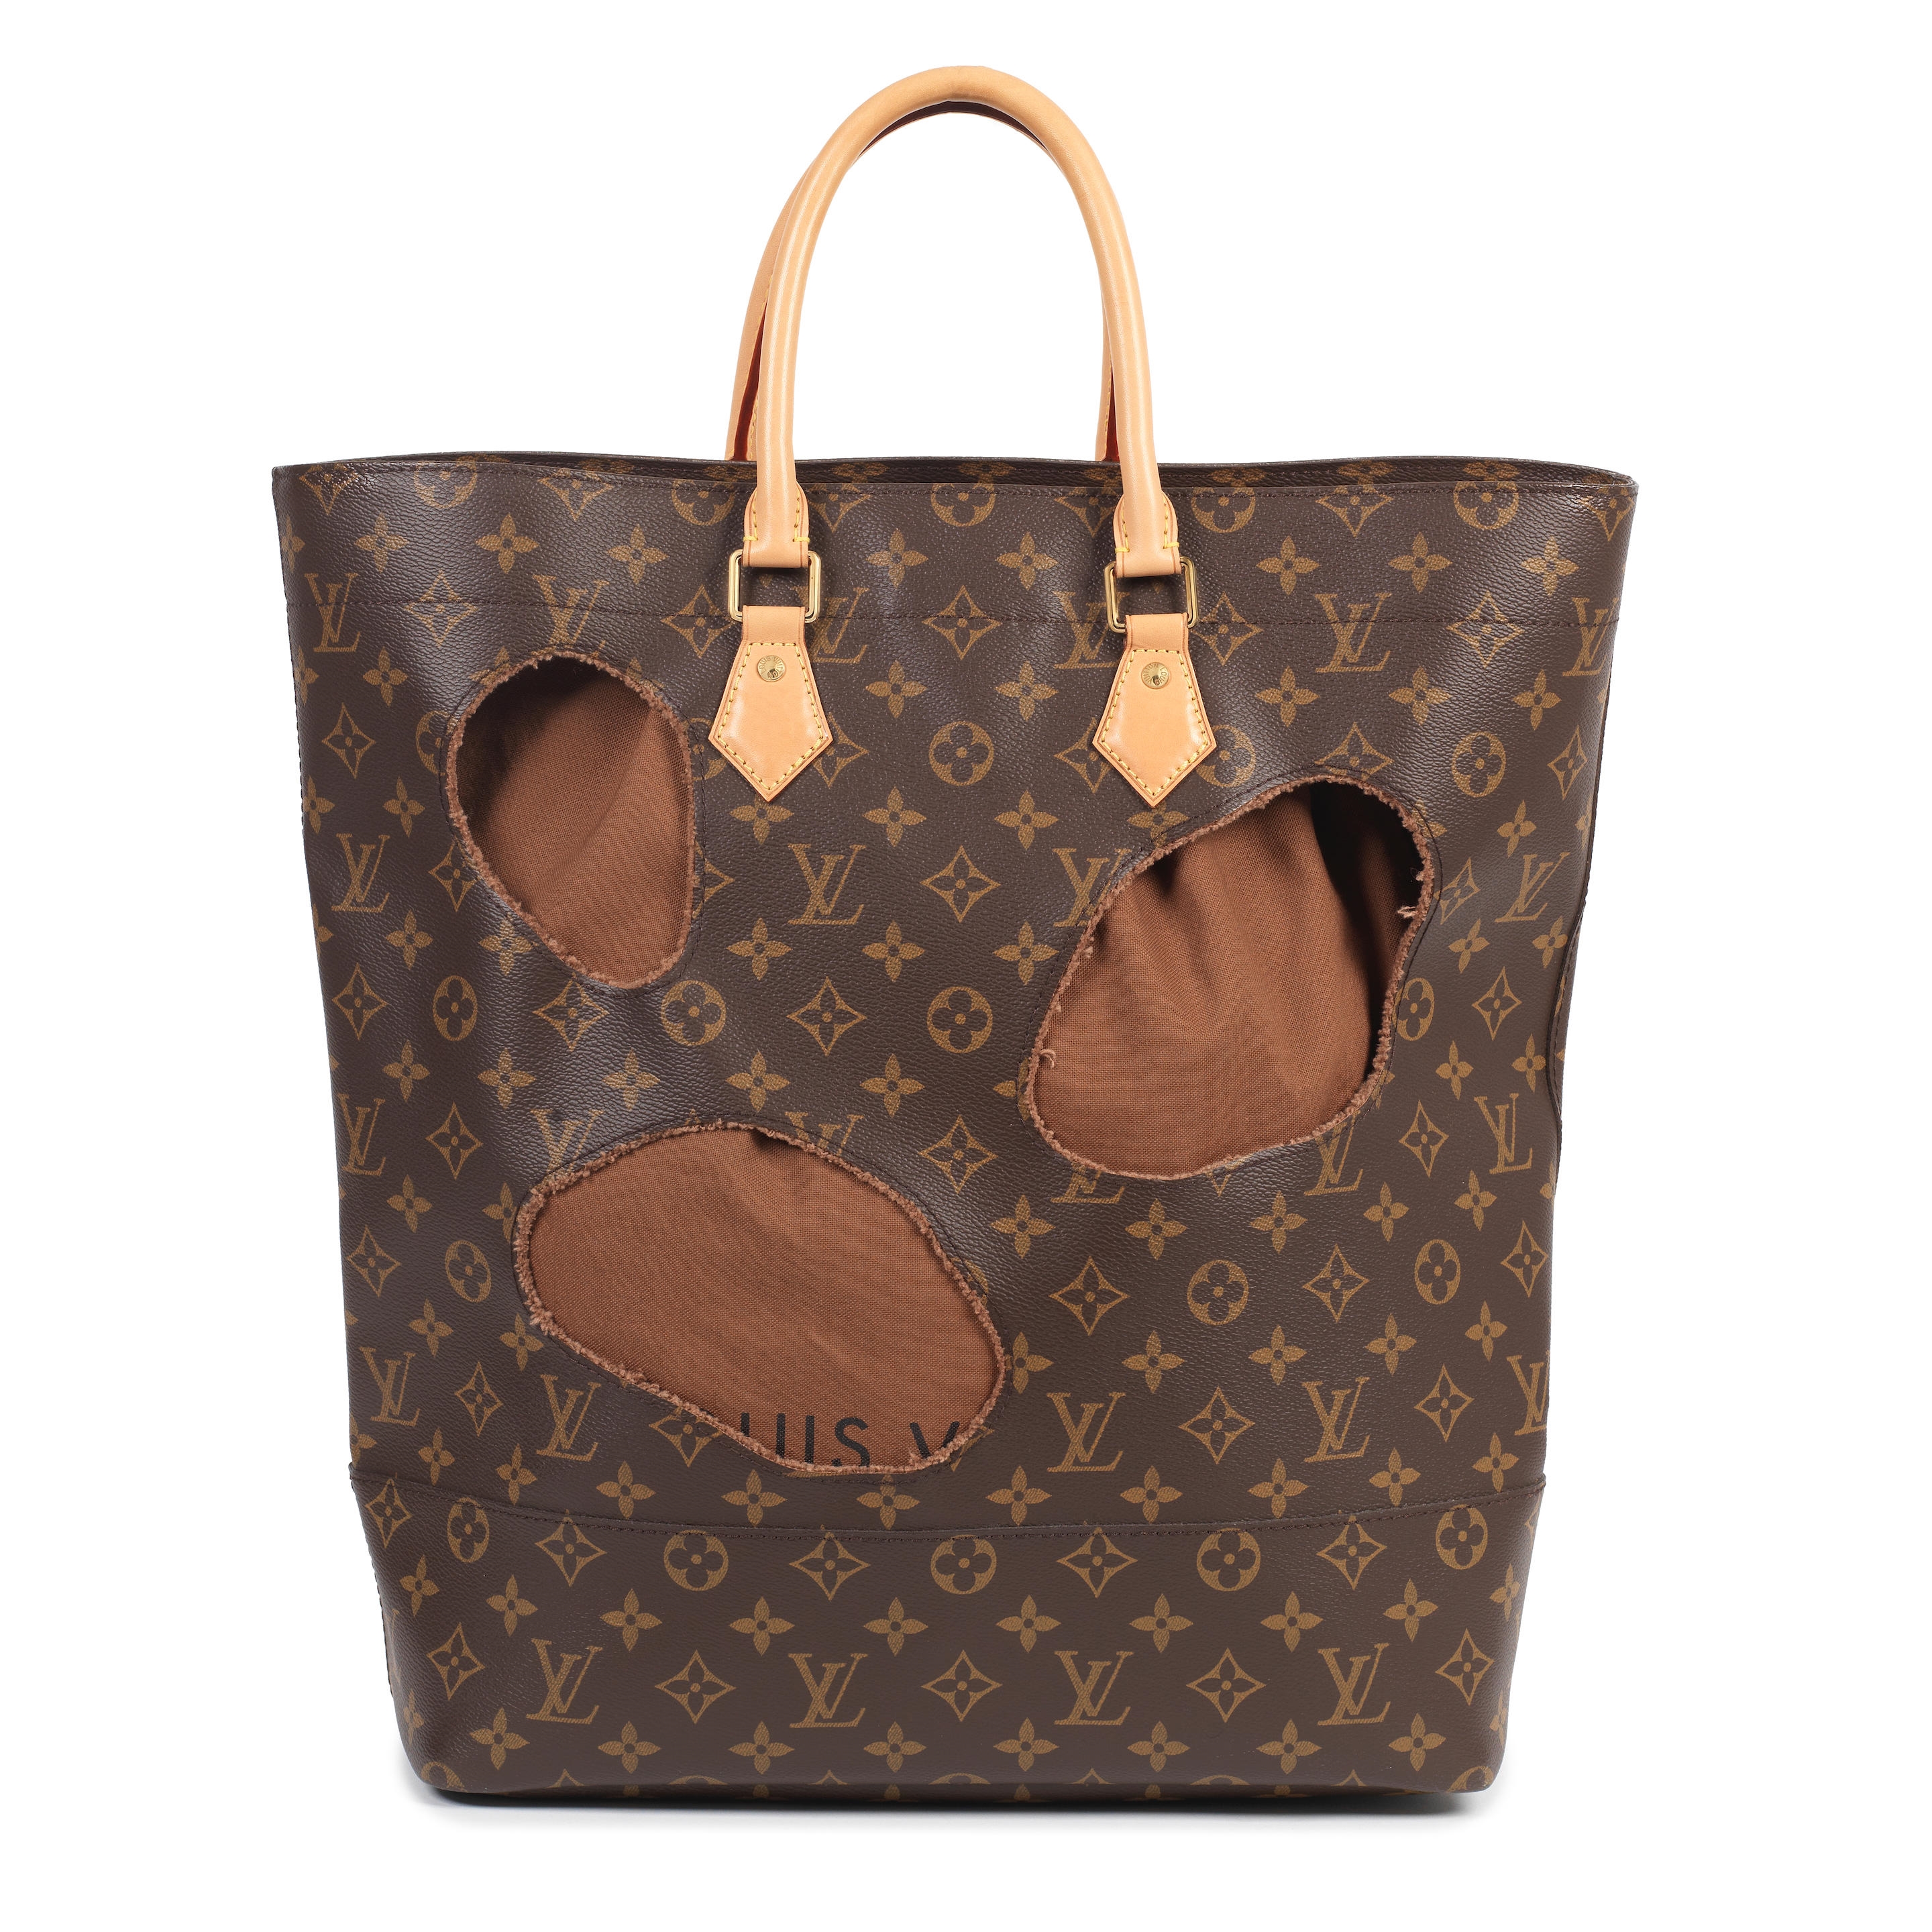 At Auction: Louis Vuitton, Louis Vuitton - NEW - On the go MM - Black/Beige  Embossed Leather Tote w/ Strap